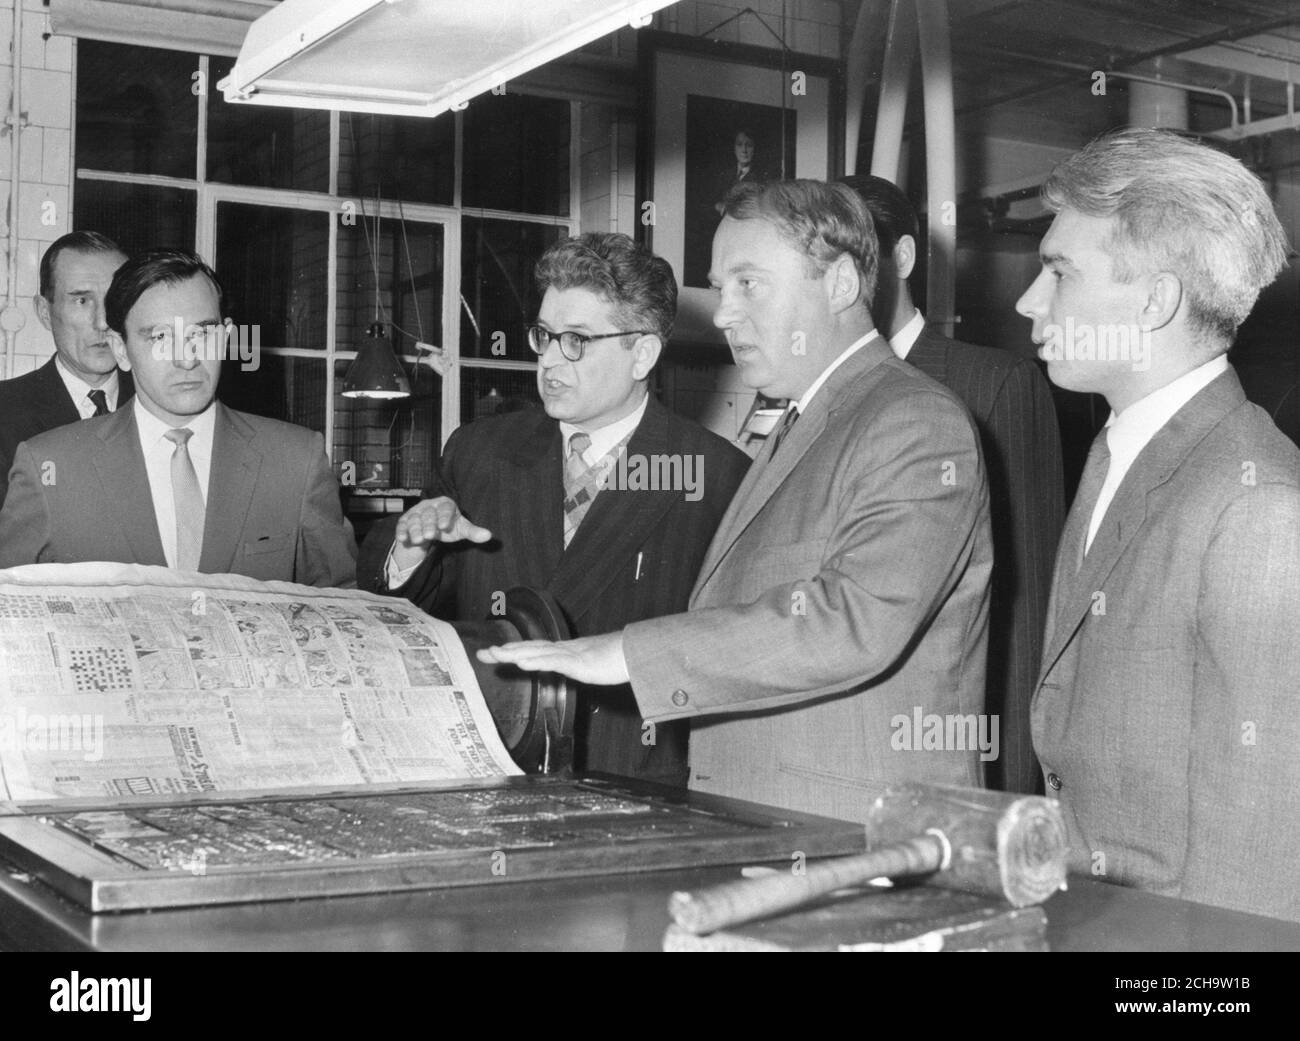 Alexei Adjubei (second right), son-in-law of Nikita Khrushchev and Editor of Izvestia, and Victor Maevsky (glasses), an editor of Pravda, are pictured in the composing room when they paid a surprise visit to the Daily Mail at Northcliffe House, London. On the left is Eugeny Rogov, First Secretary of the Soviet Embassy in London, and right is Vladimir Ossipov, London correspondent of Izvestia. The party, who spent over two hours with the Daily Mail staff, attended the editorial conference and were taken for a tour of Northcliffe House. Stock Photo